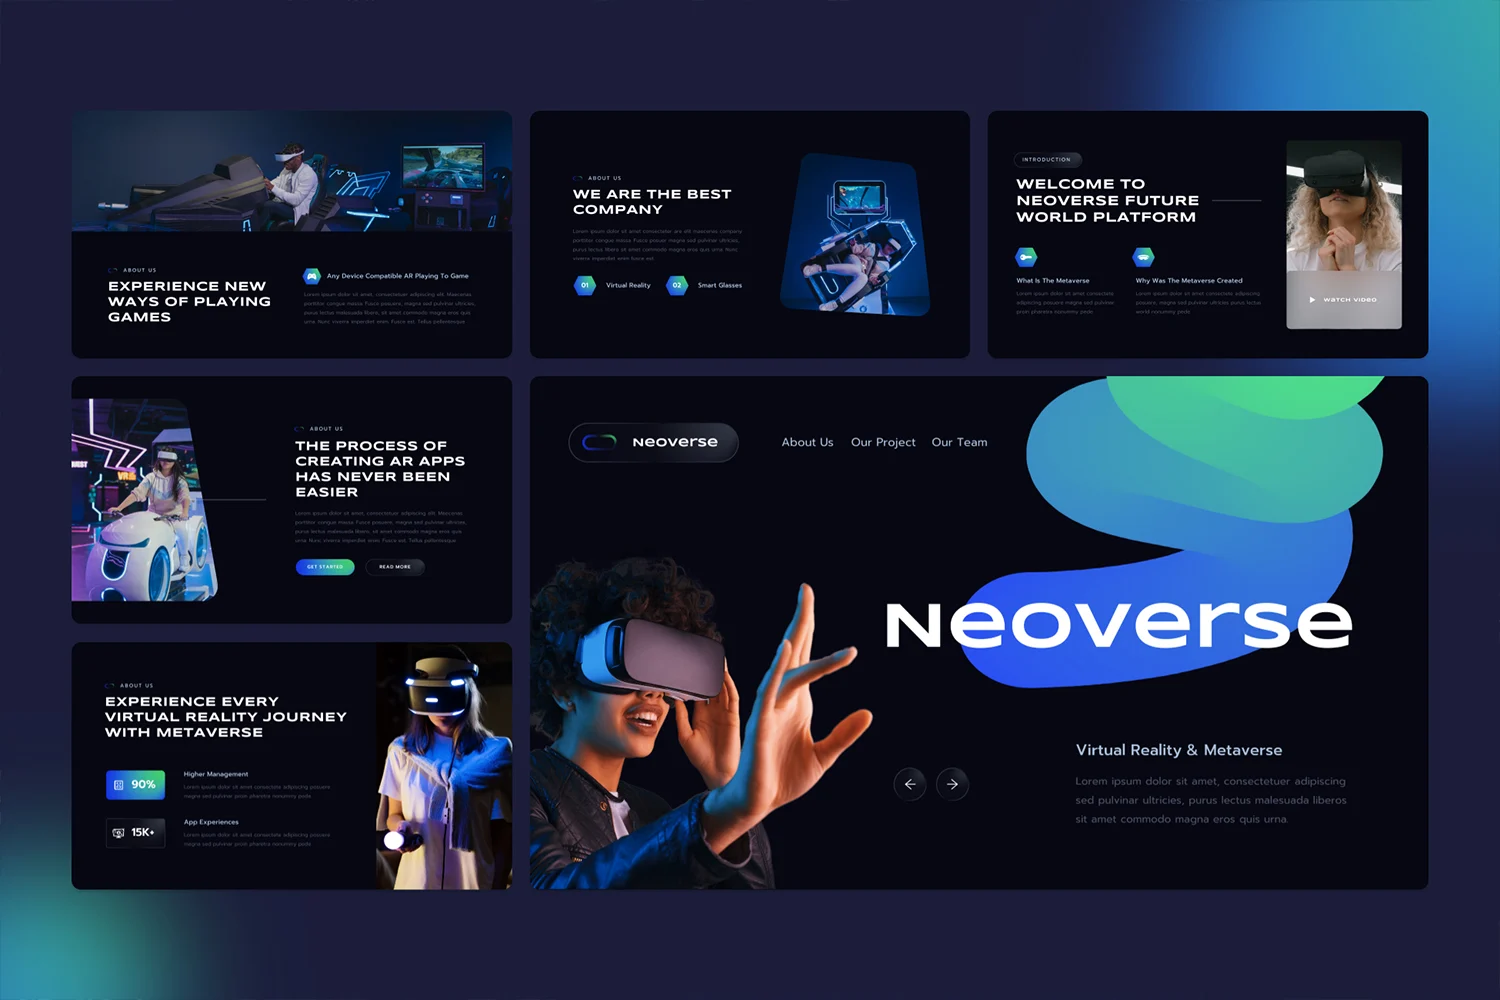 Neoverse technology presentation template for virtual reality & metaverse